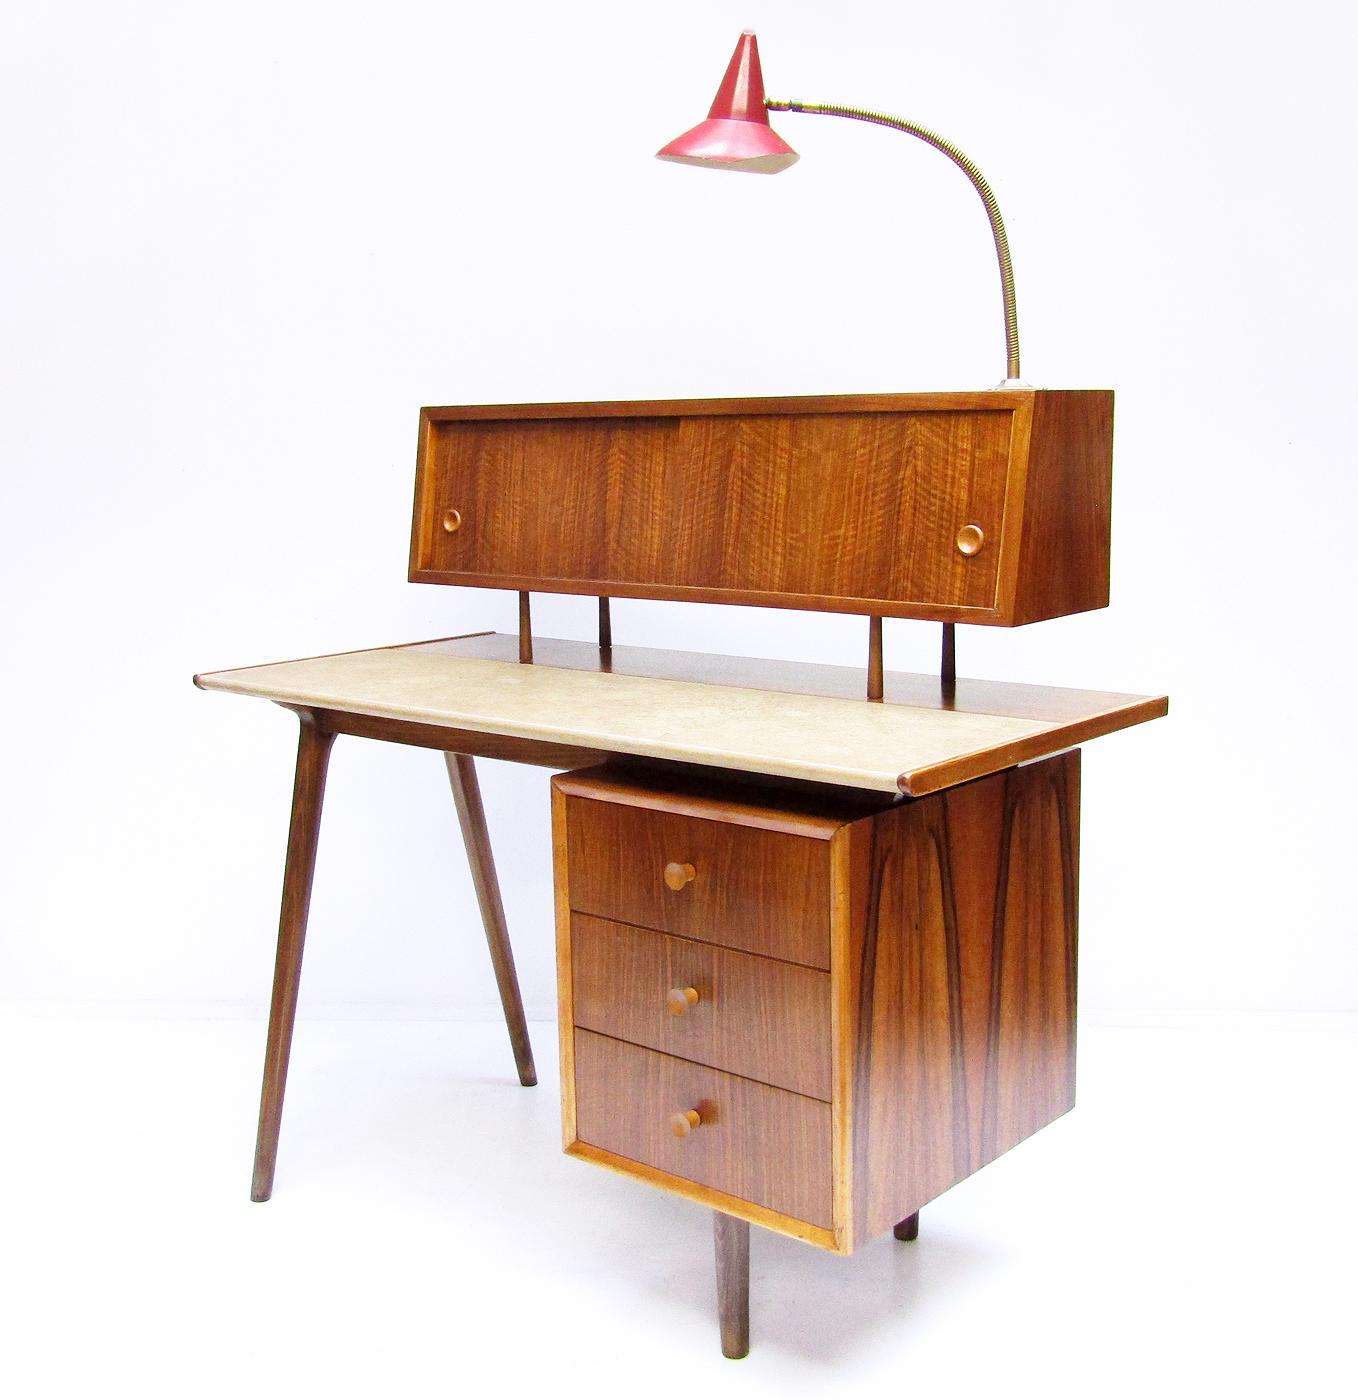 British 1950s Vintage Atomic Desk in Walnut with Floating Cabinet & Lamp